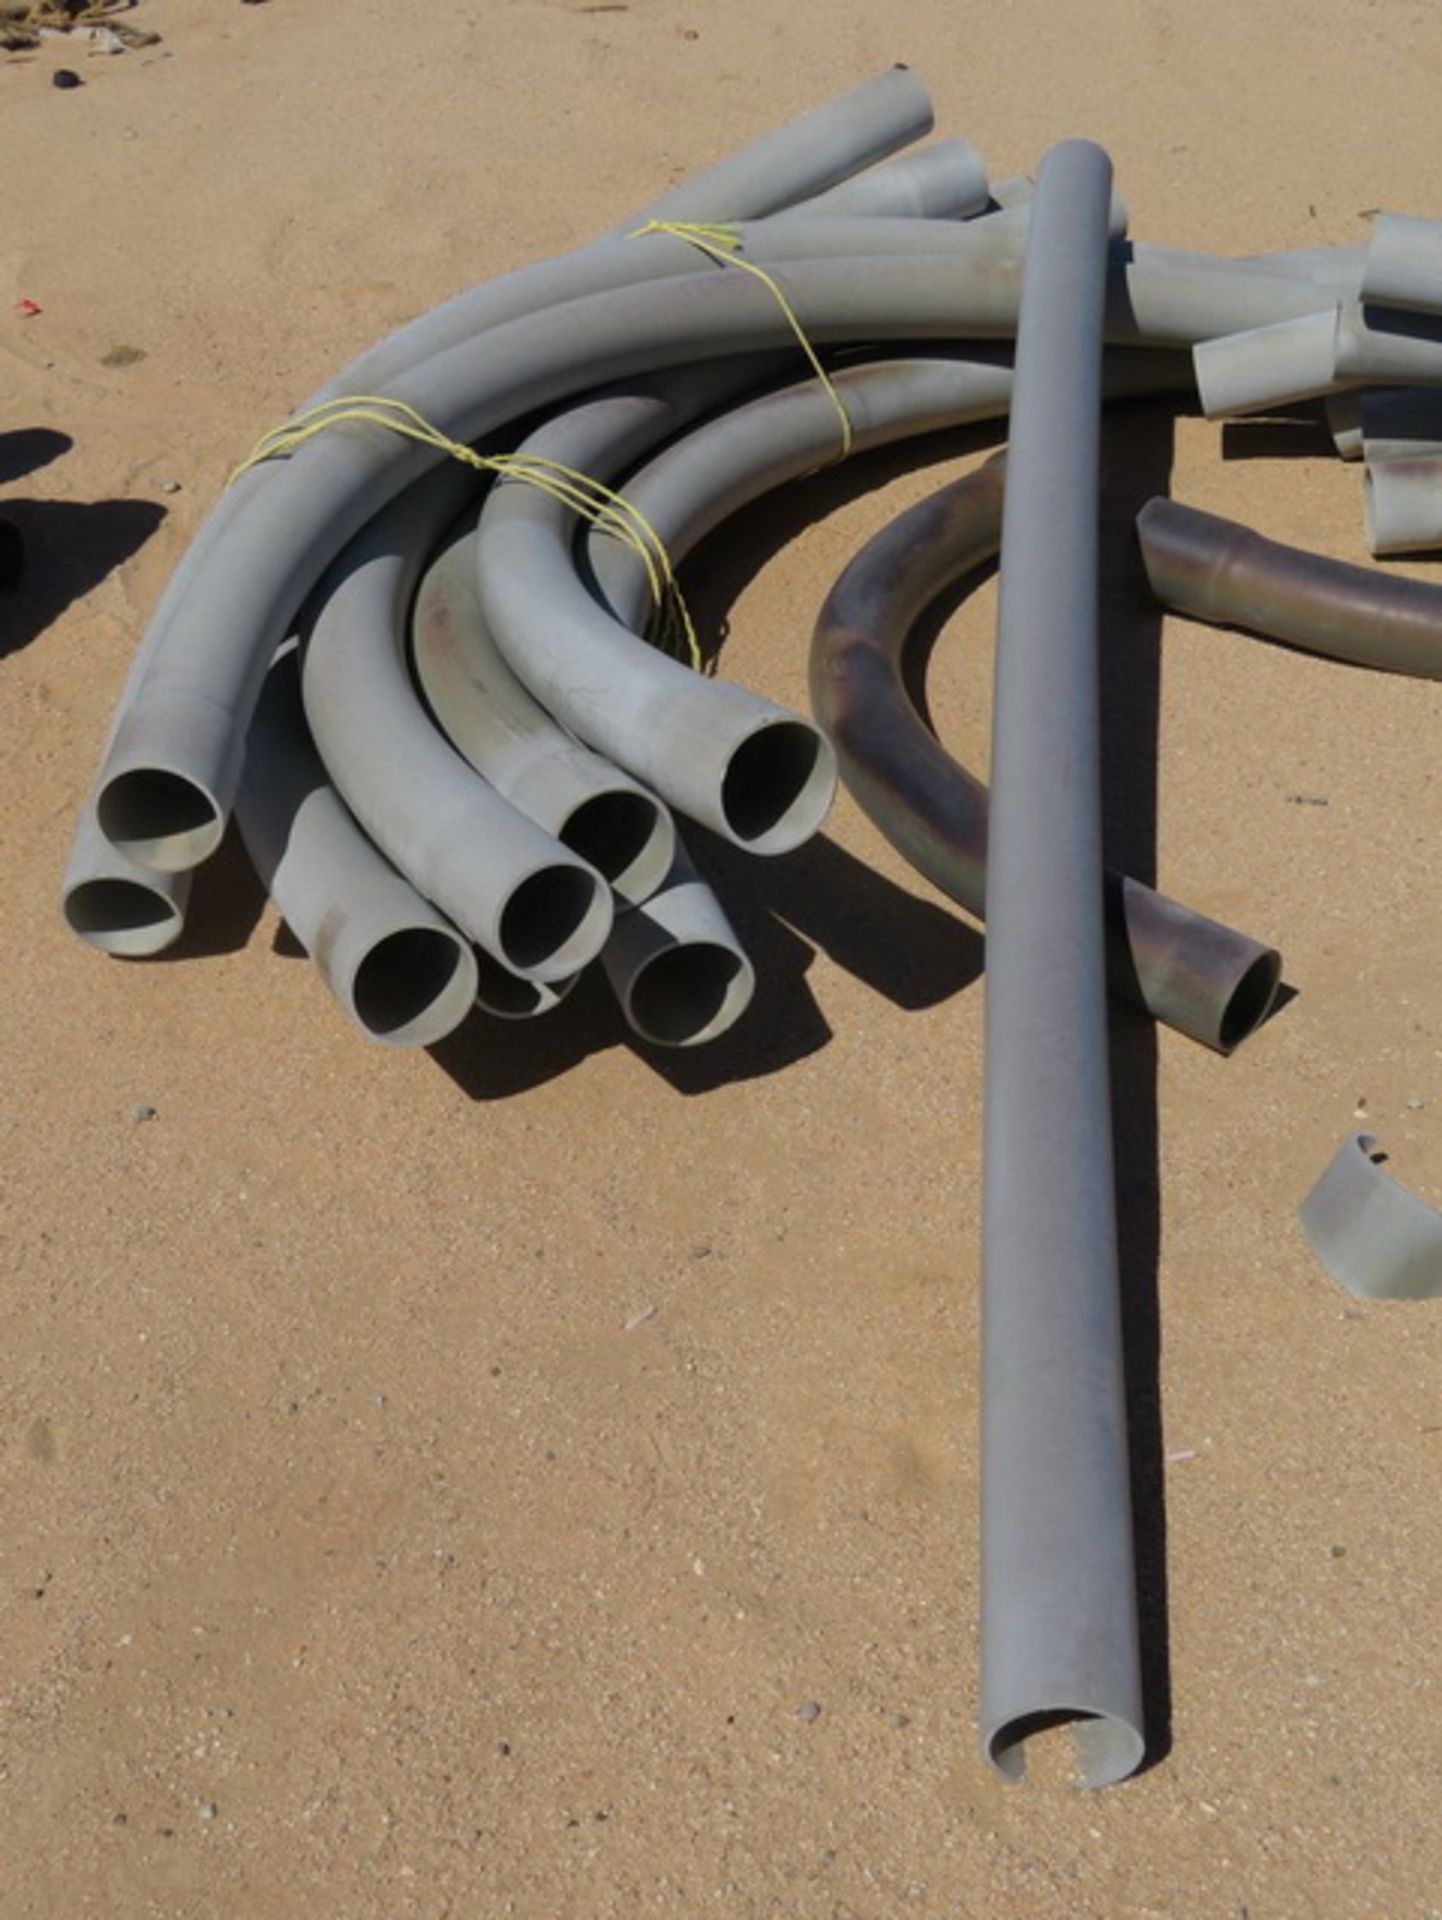 PVC Conduit Fittings To Include Sleeves, 30°, 45° & 90° Elbows, Sleeves & Pipe, 6" & 4" Sizes. - Image 9 of 10